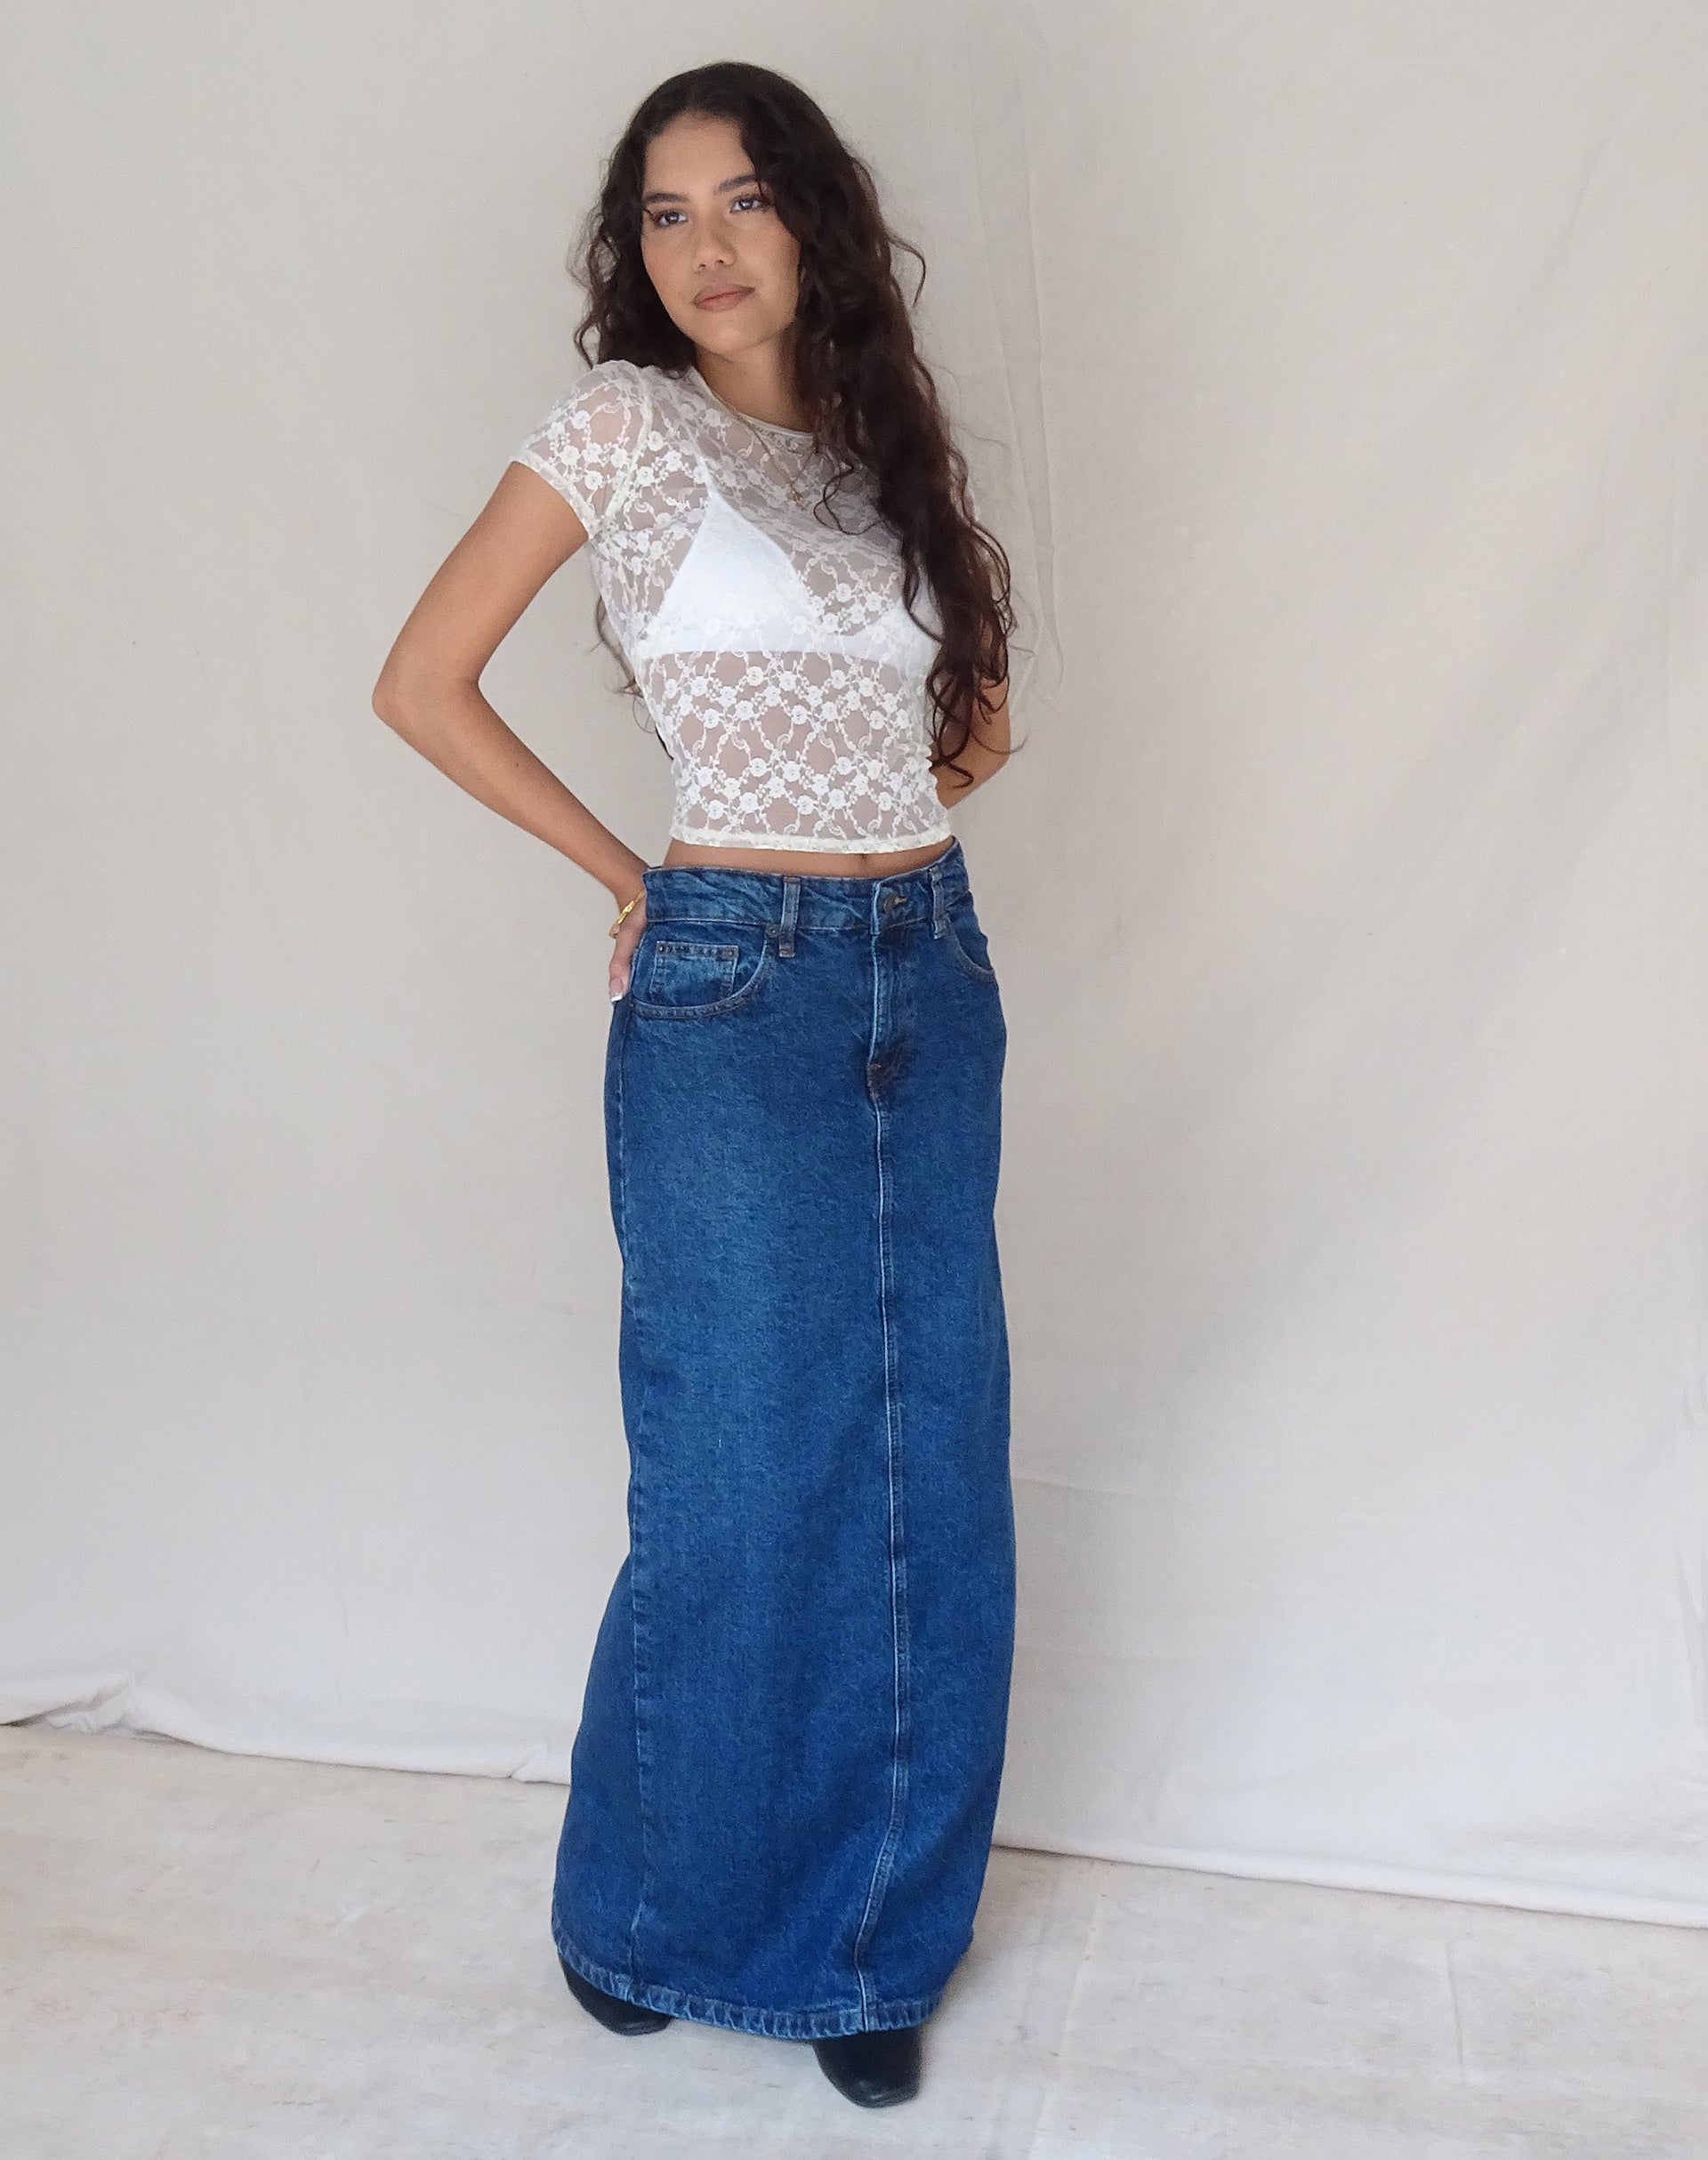 image of Low Rise Denim Maxi Skirt in Mid Blue Used